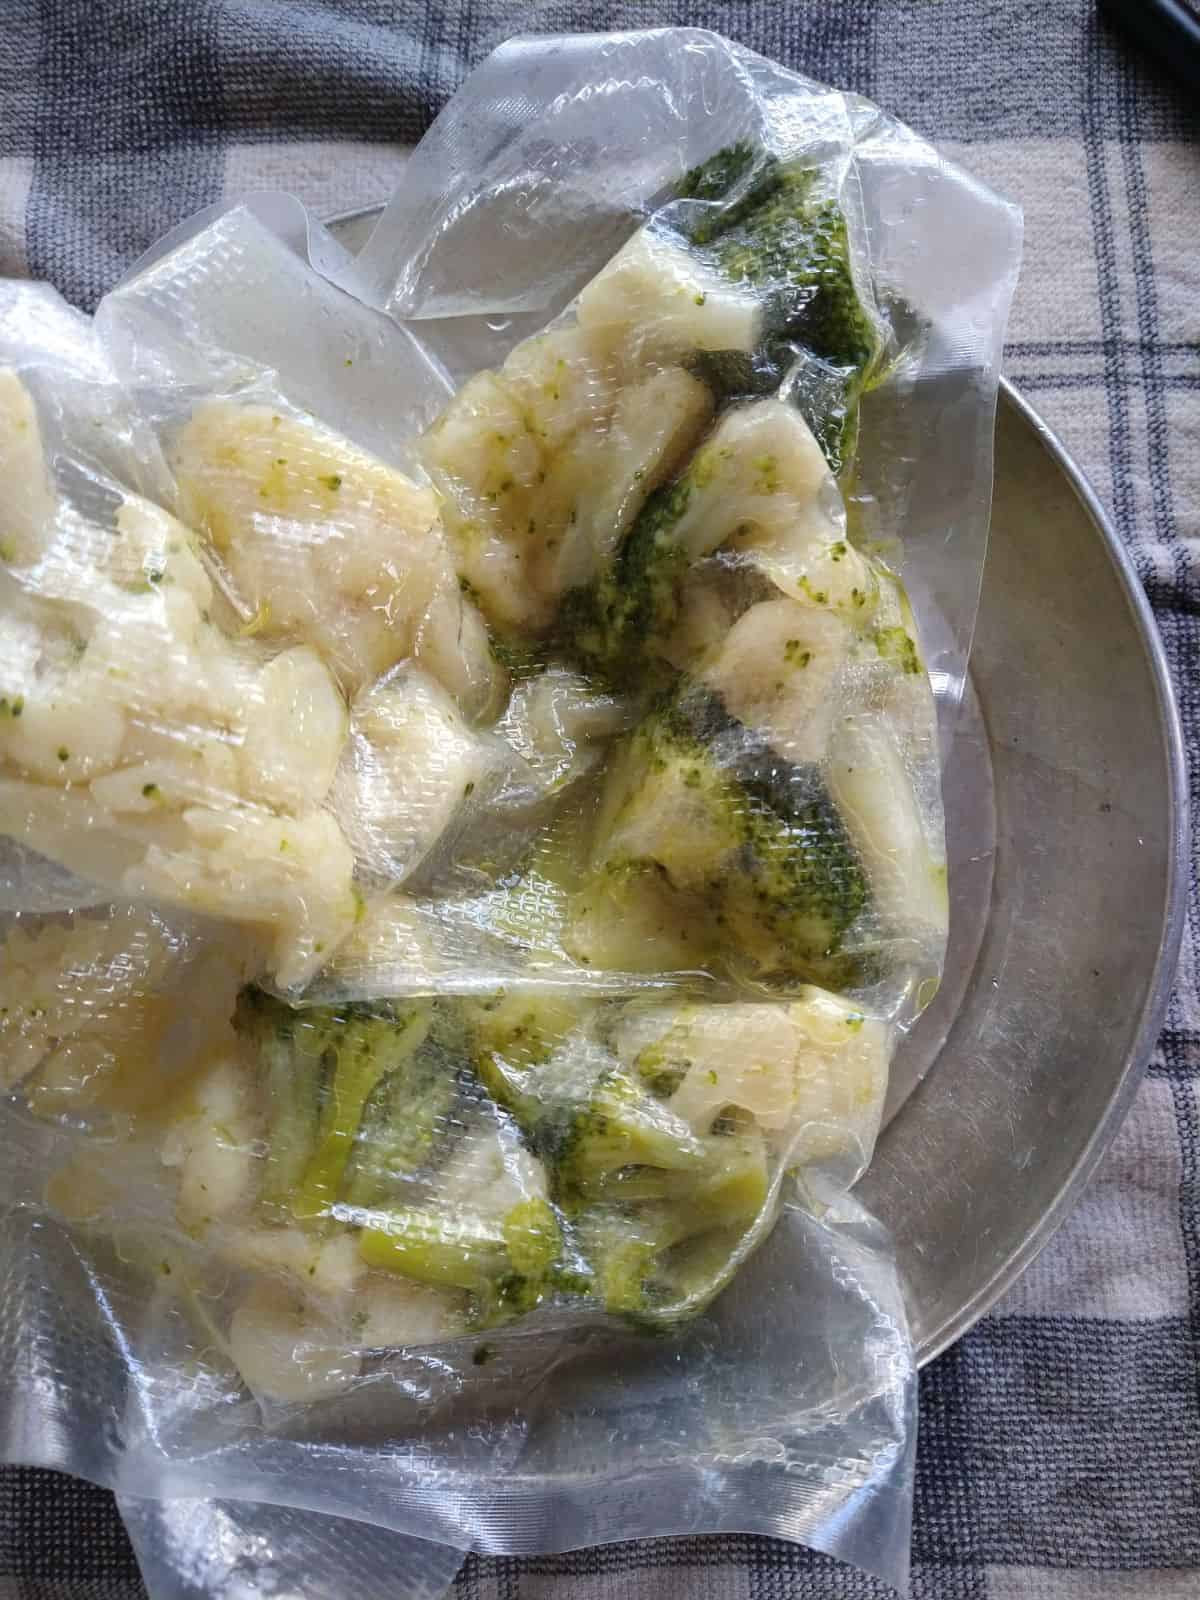 Sous vide broccoli and cauliflower still in the bag on a metal camping plate with a gray and white towel underneath. 